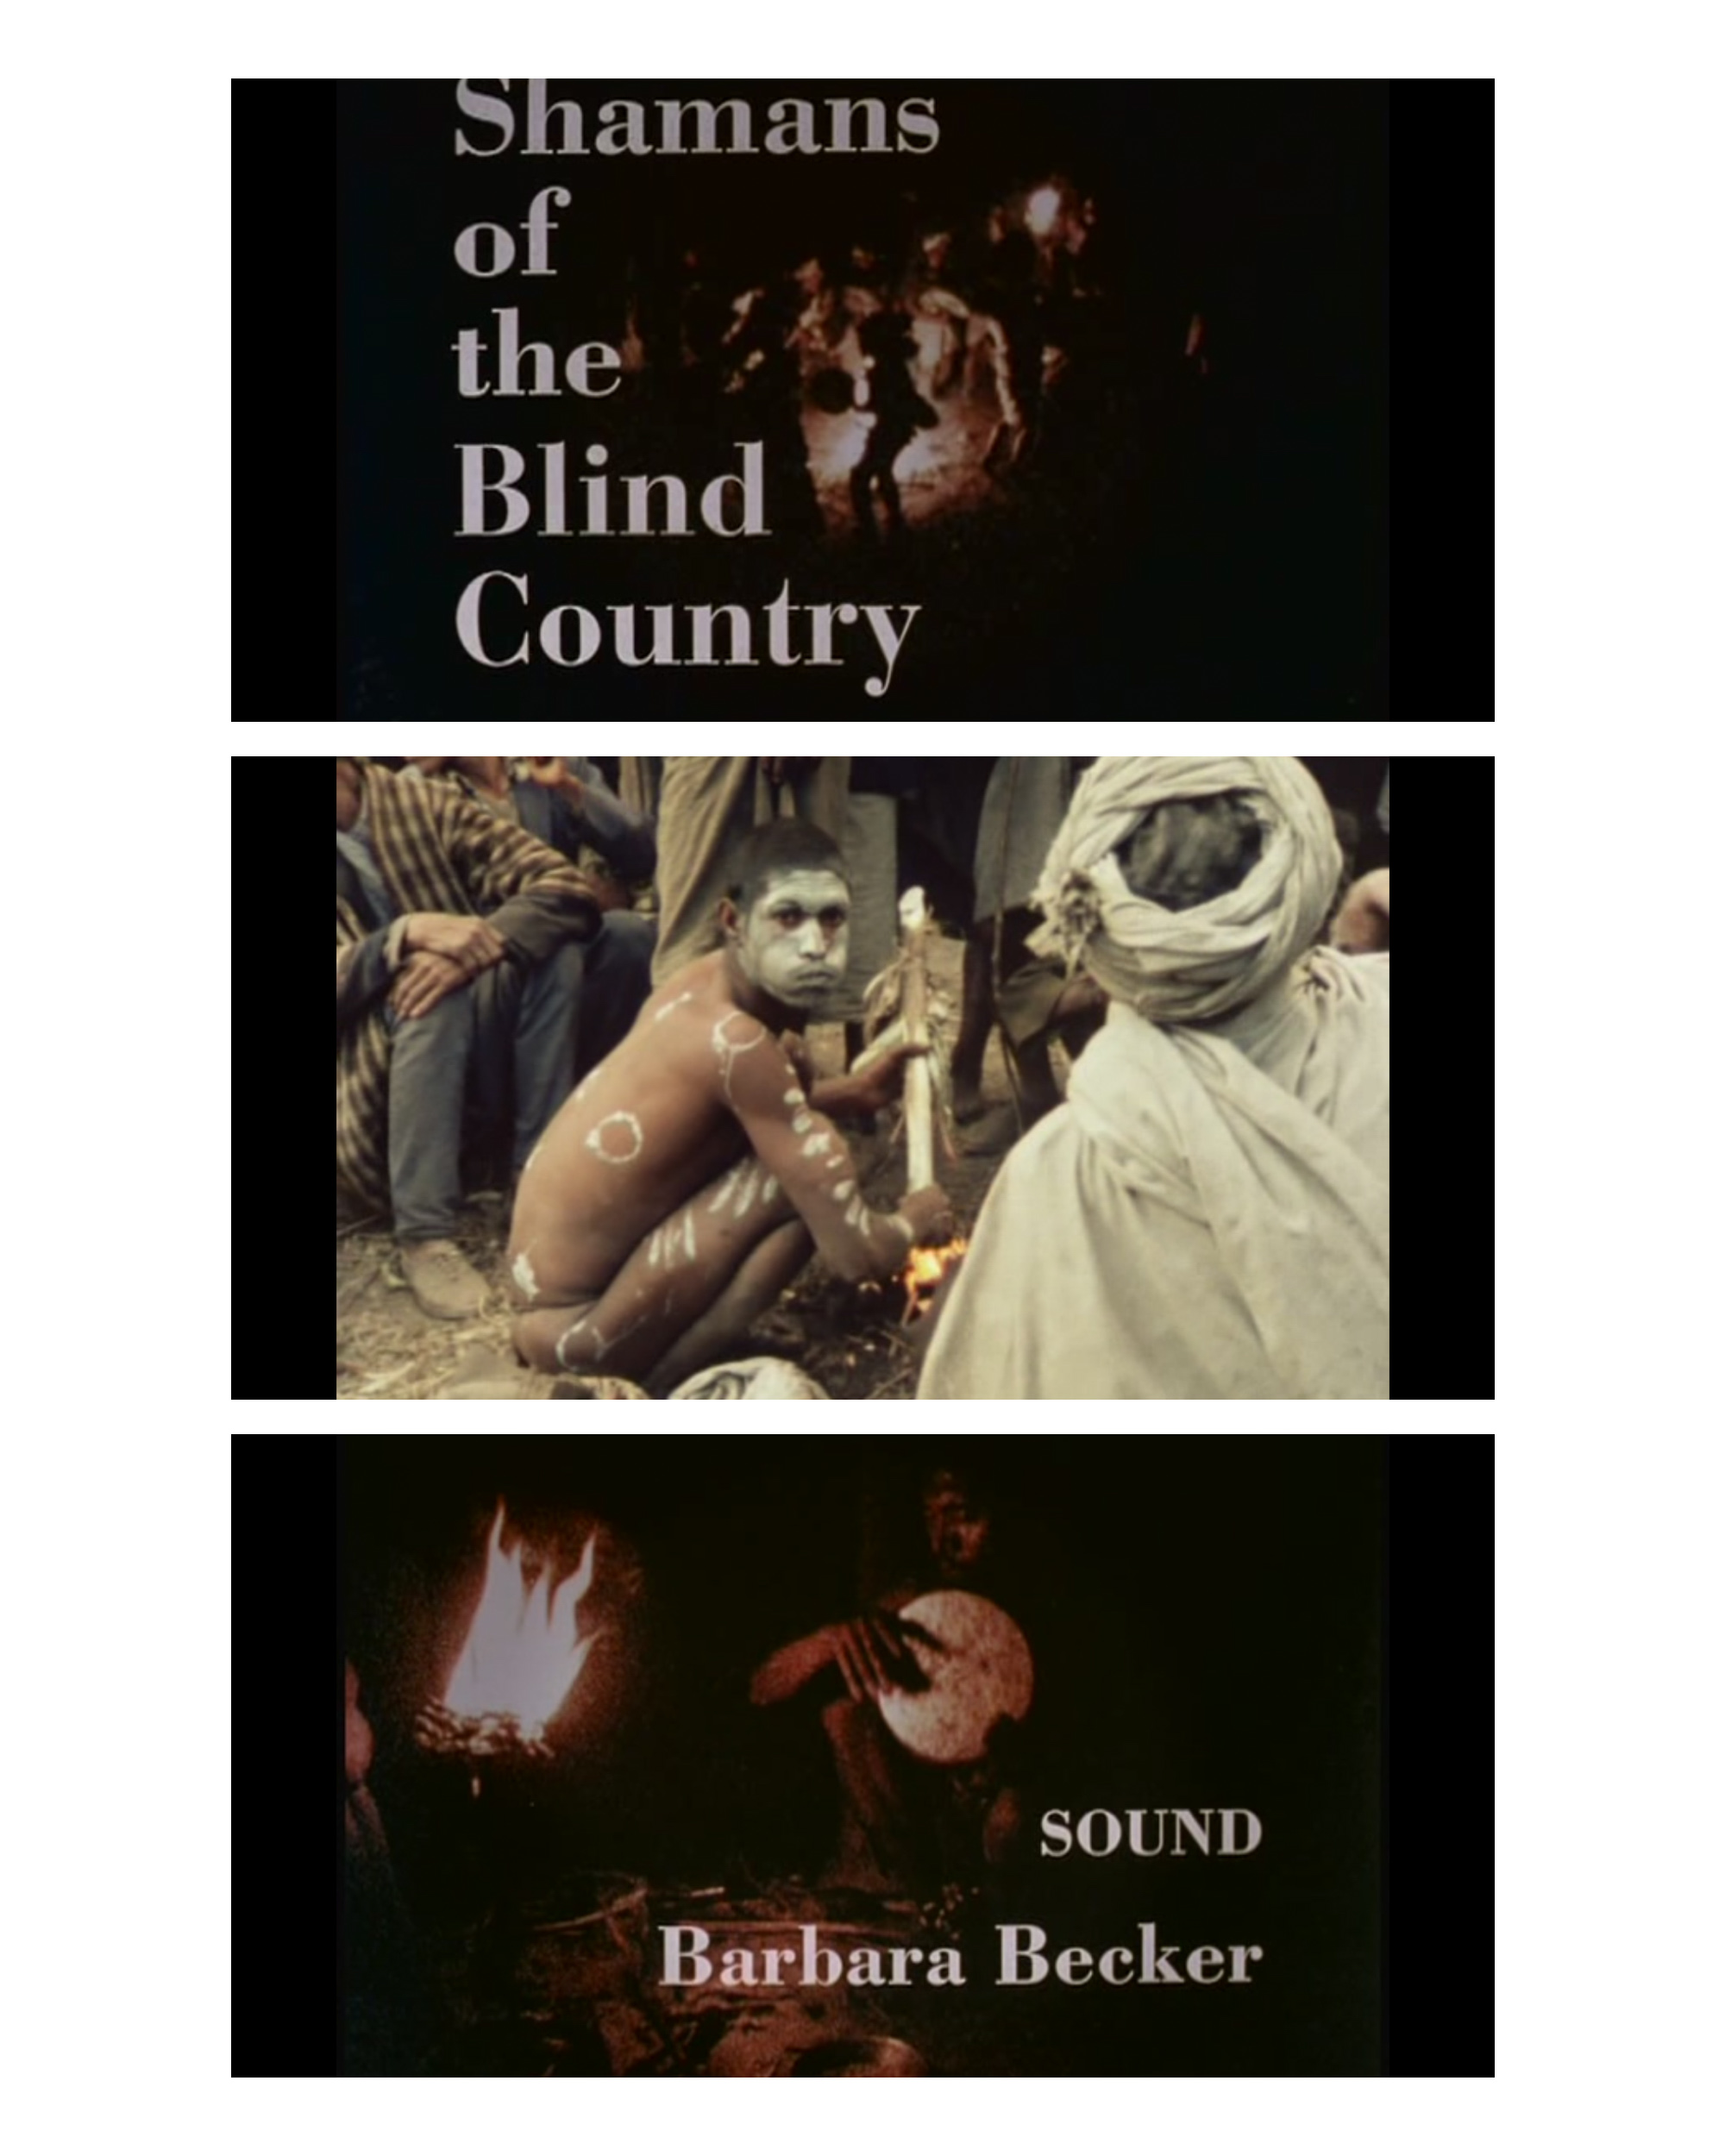 Stills from Shamans of the Blind Country, a 1981 documentary that follows shamanism and the Magar people in Nepal.